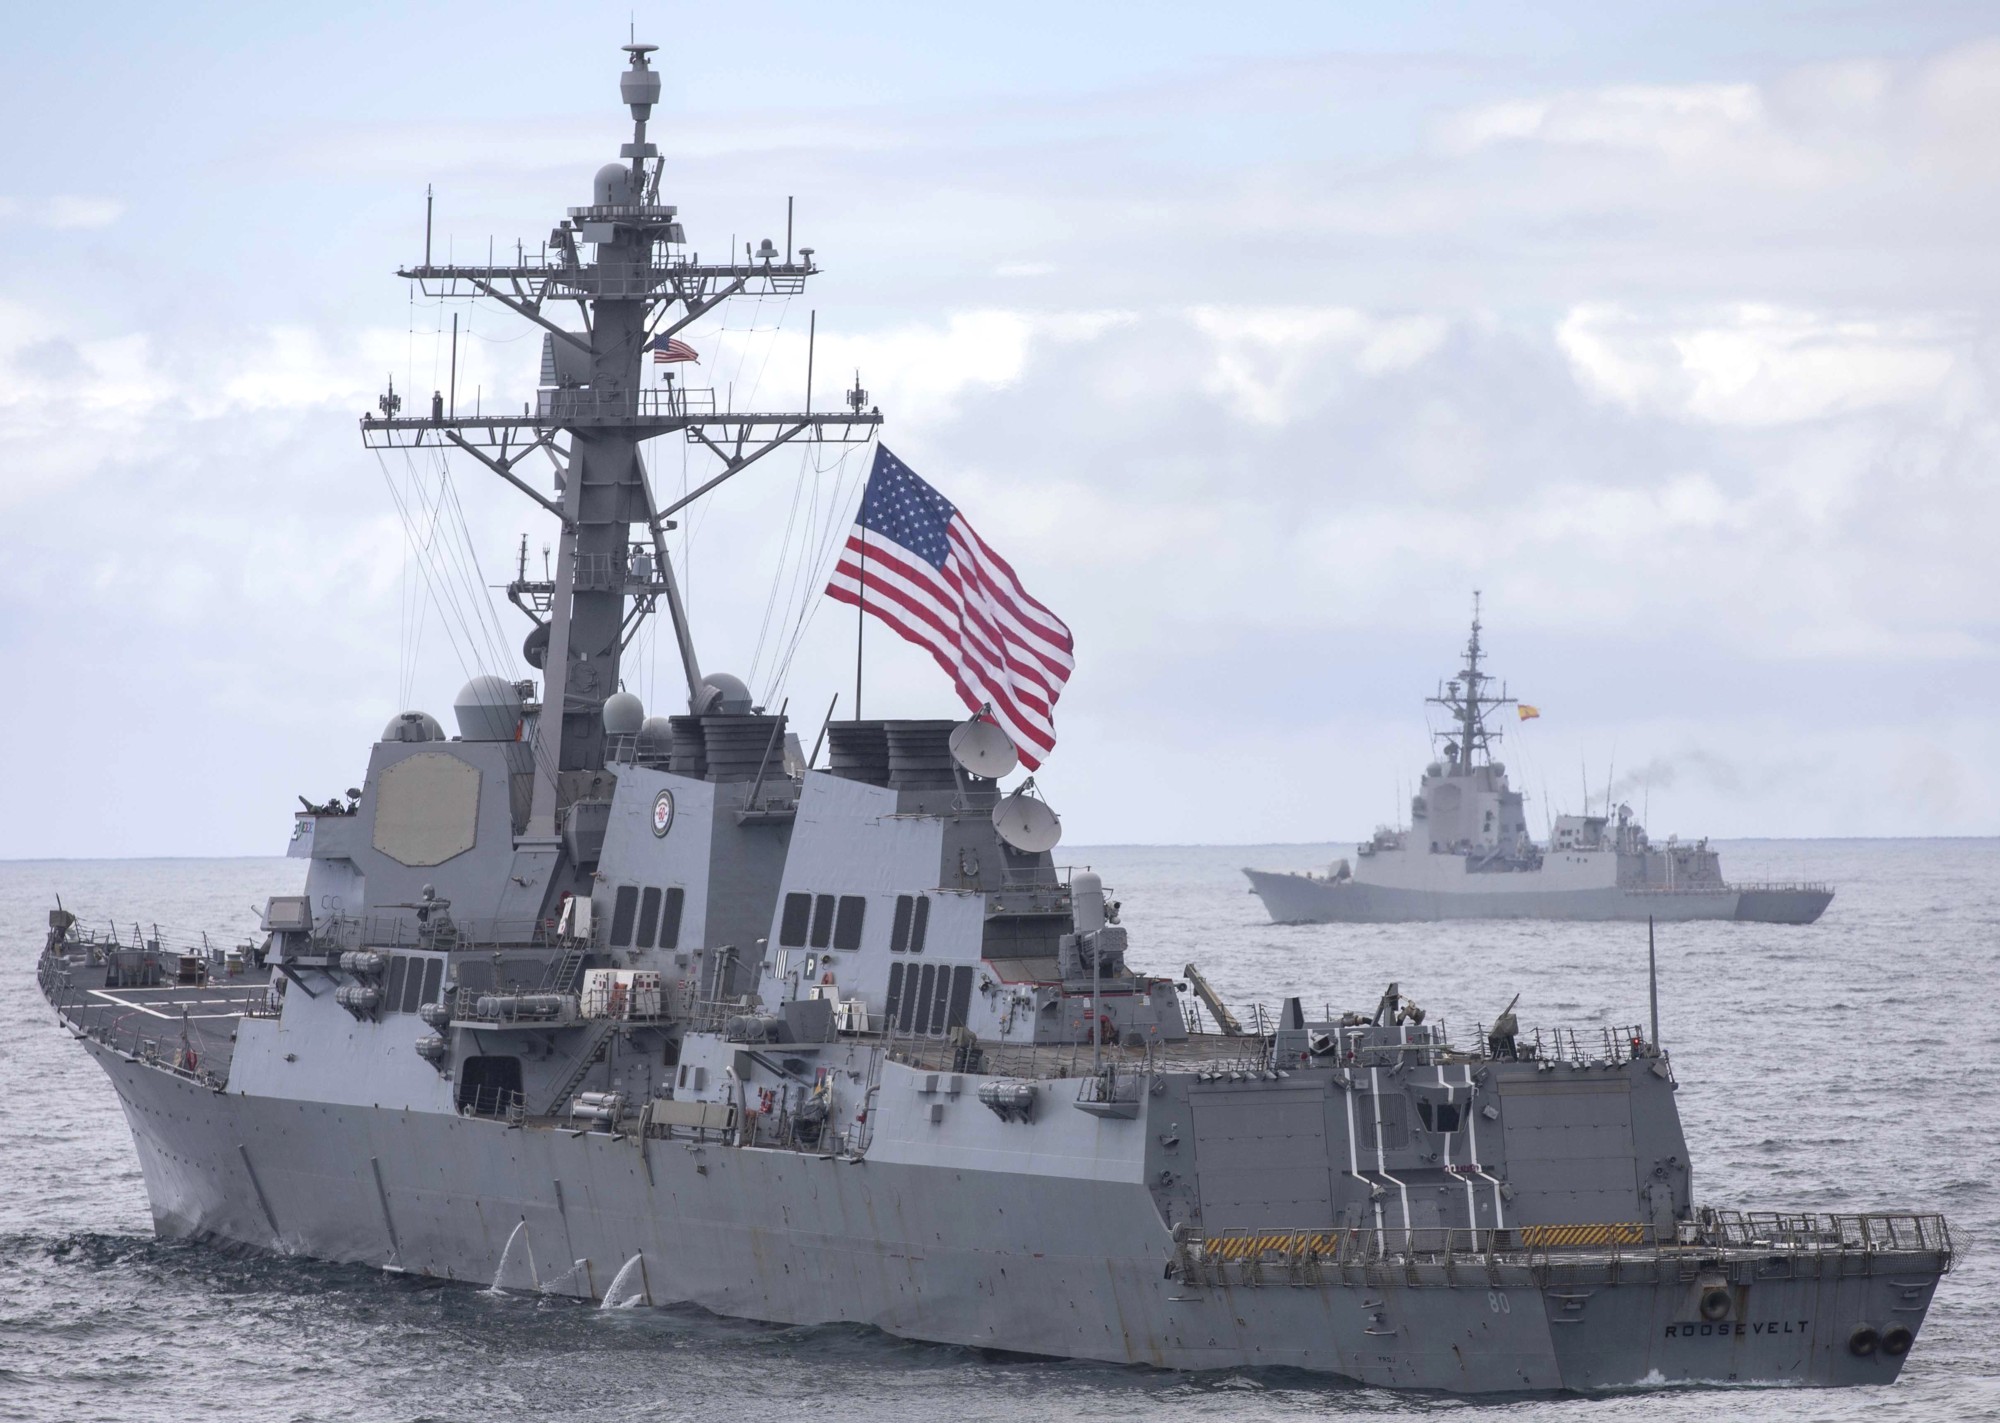 ddg-80 uss roosevelt guided missile destroyer arleigh burke class us navy formidable shield 80